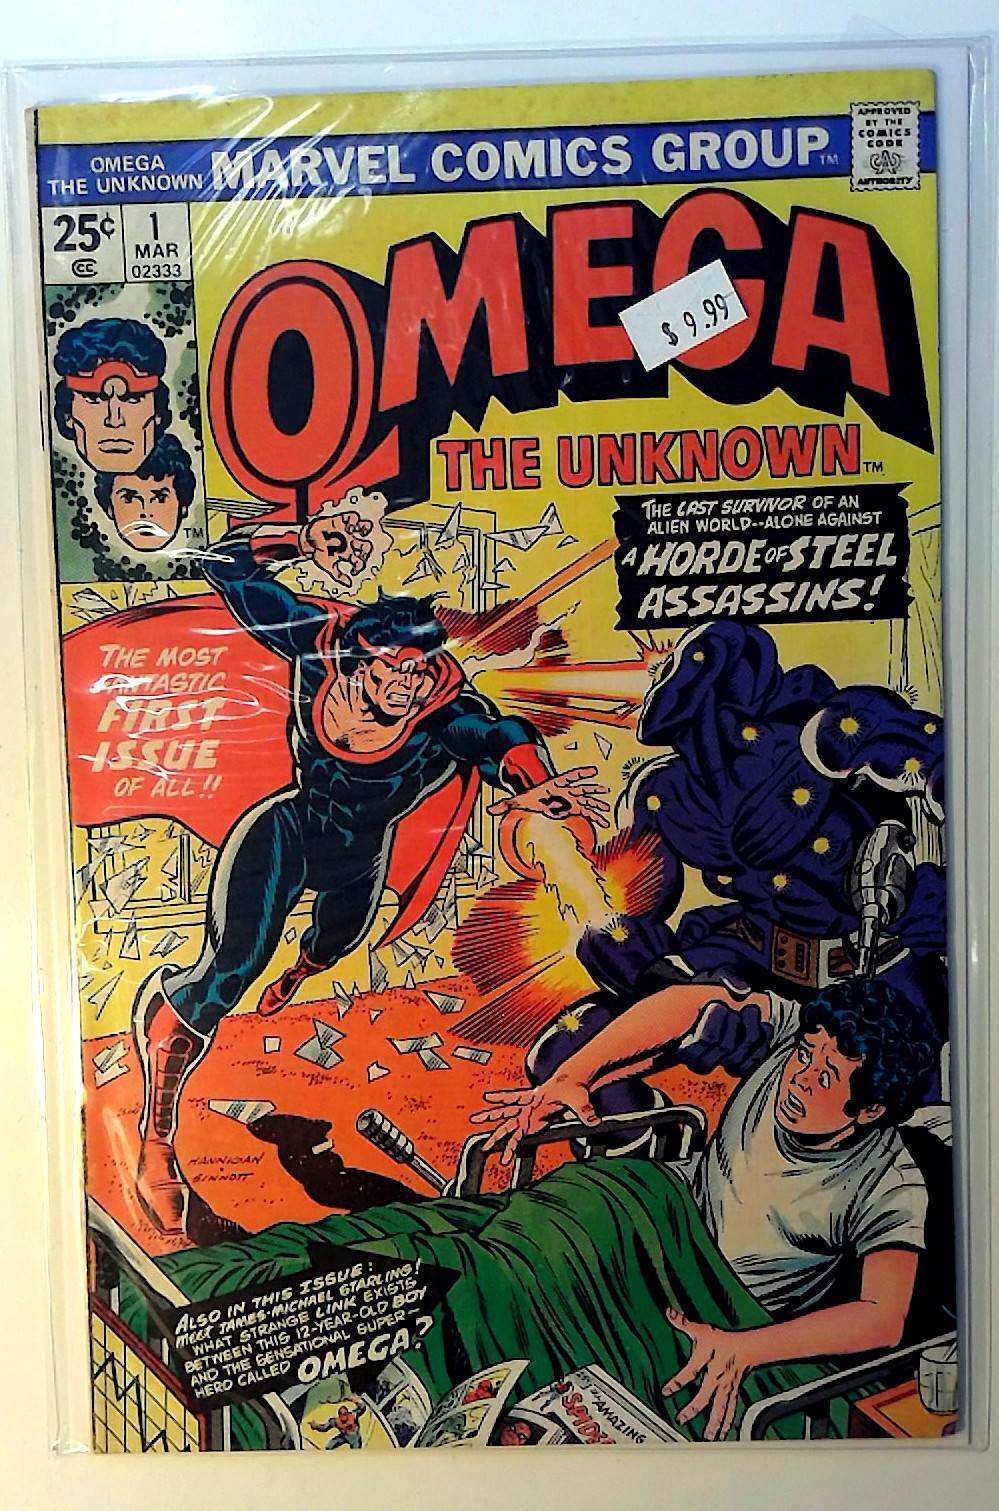 Omega the Unknown #1 Marvel Comics (1976) FN+ 1st Print Comic Book